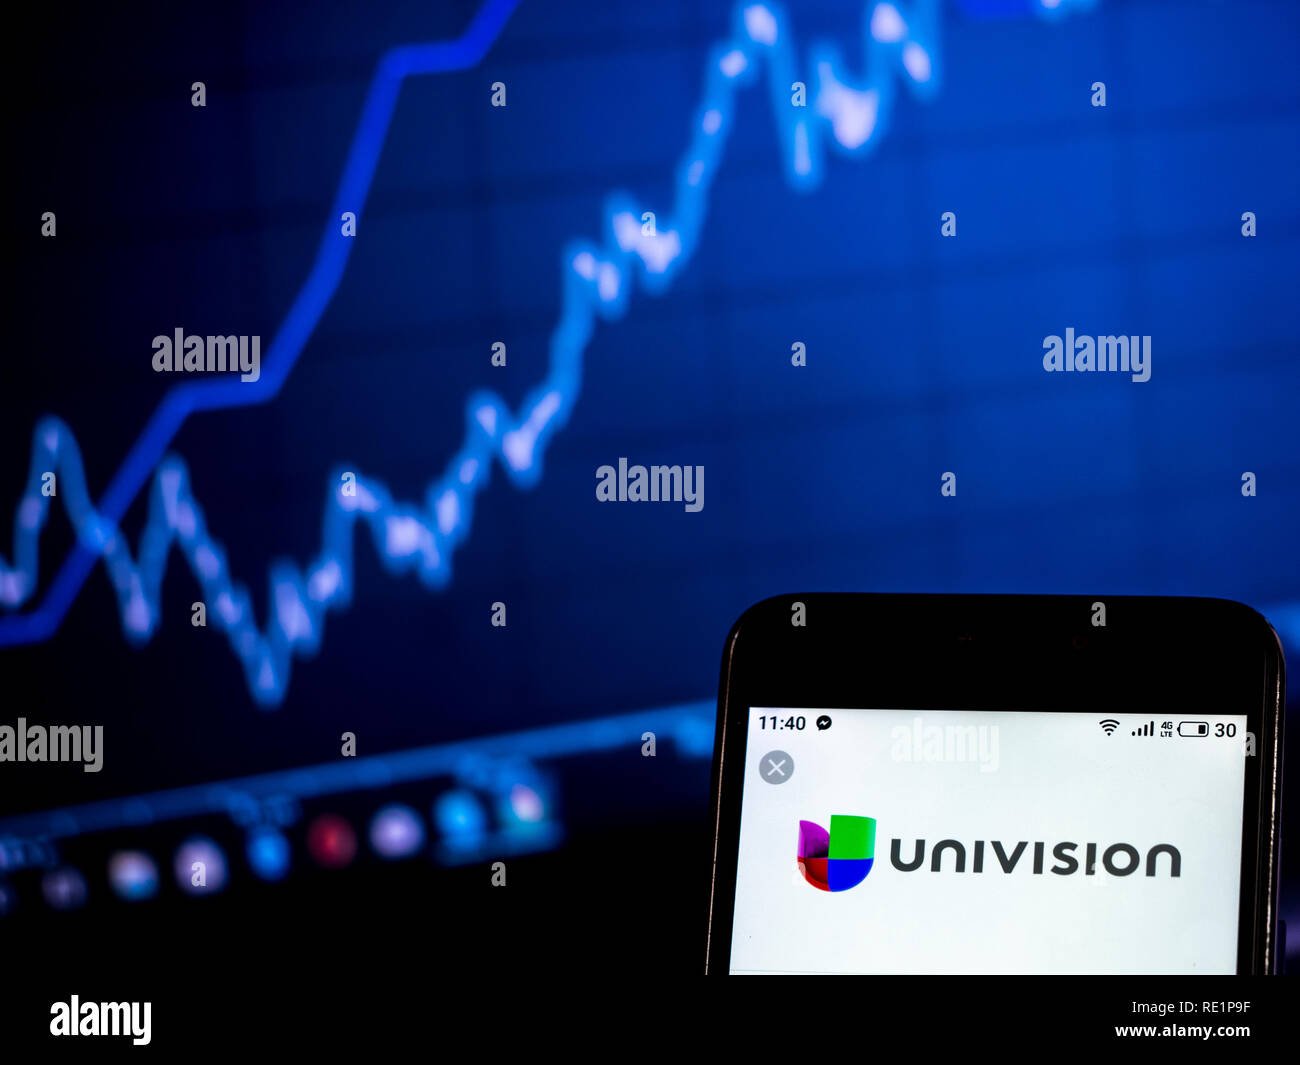 https://c8.alamy.com/comp/RE1P9F/univision-television-network-logo-seen-displayed-on-smart-phone-RE1P9F.jpg